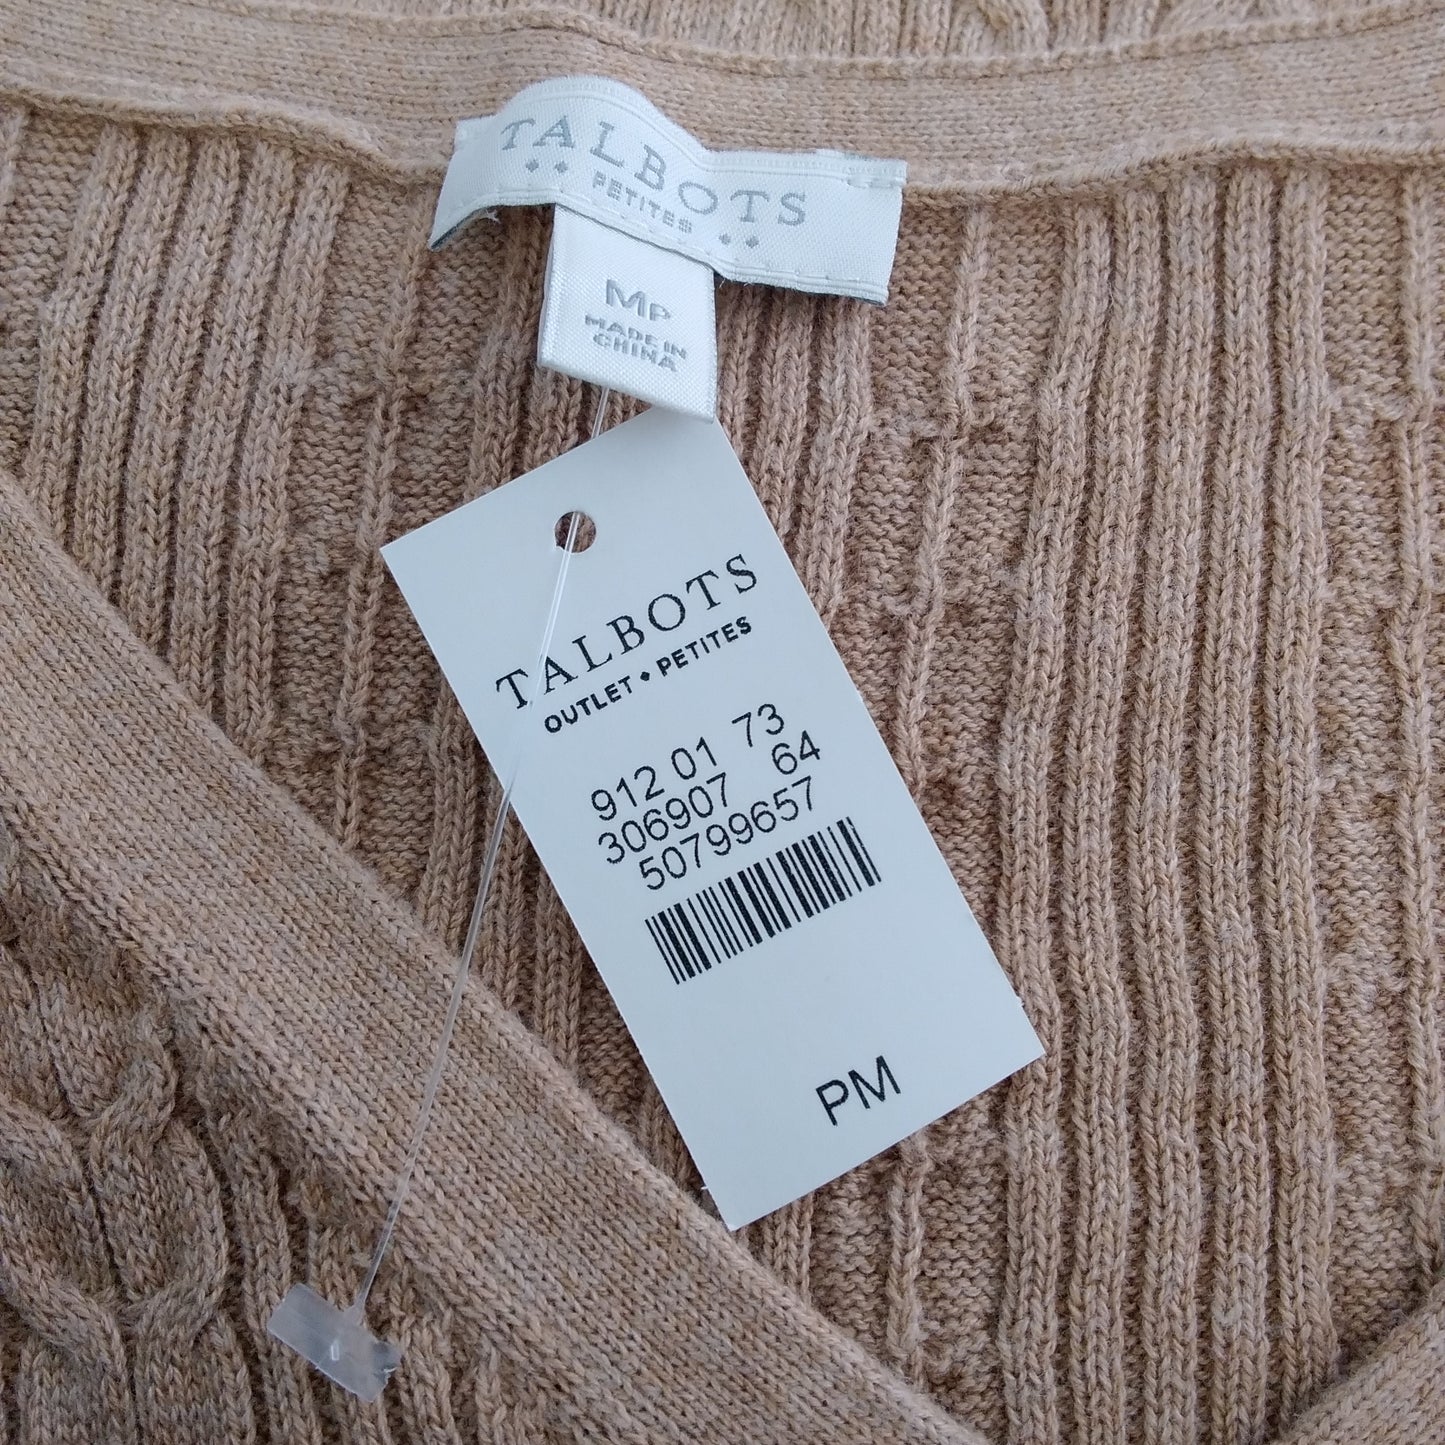 NWT - Talbots Petites Brown Lightweight Cableknit V-Neck Sweater - Size: M